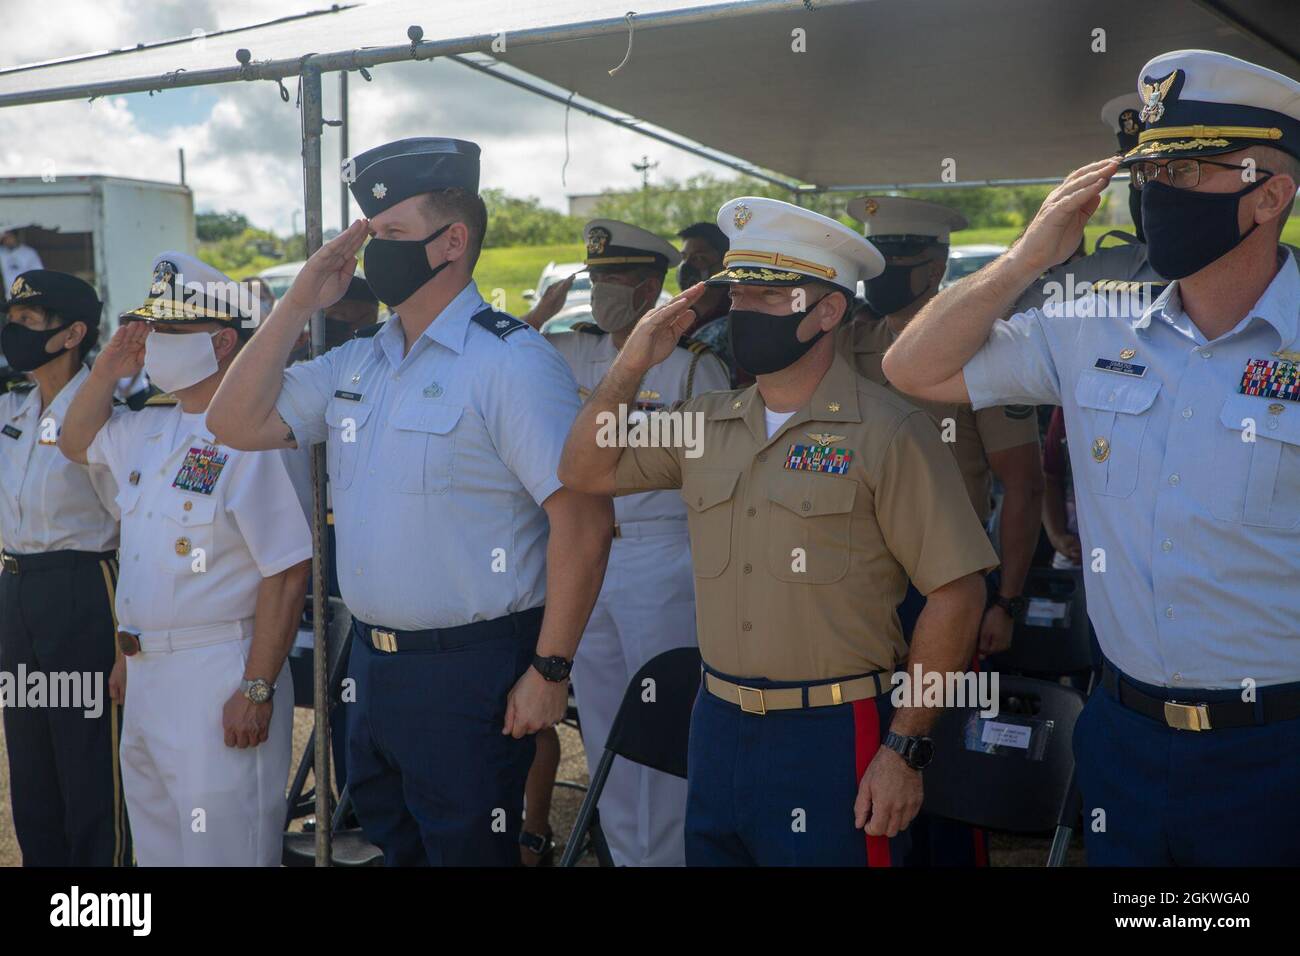 Marine Corps Base (MCB) Camp Blaz senior leaders render a salute during the playing of the national anthem during a wreath laying ceremony and memorial service at the Kǻlaguak memorial in Barrigada, Guam, July 9, 2021. The Kǻlaguak memorial is located at the site of a former Japanese military airfield. The memorial service was among the many held across the island to commemorate the liberation of Guam during World War II in 1944. Stock Photo